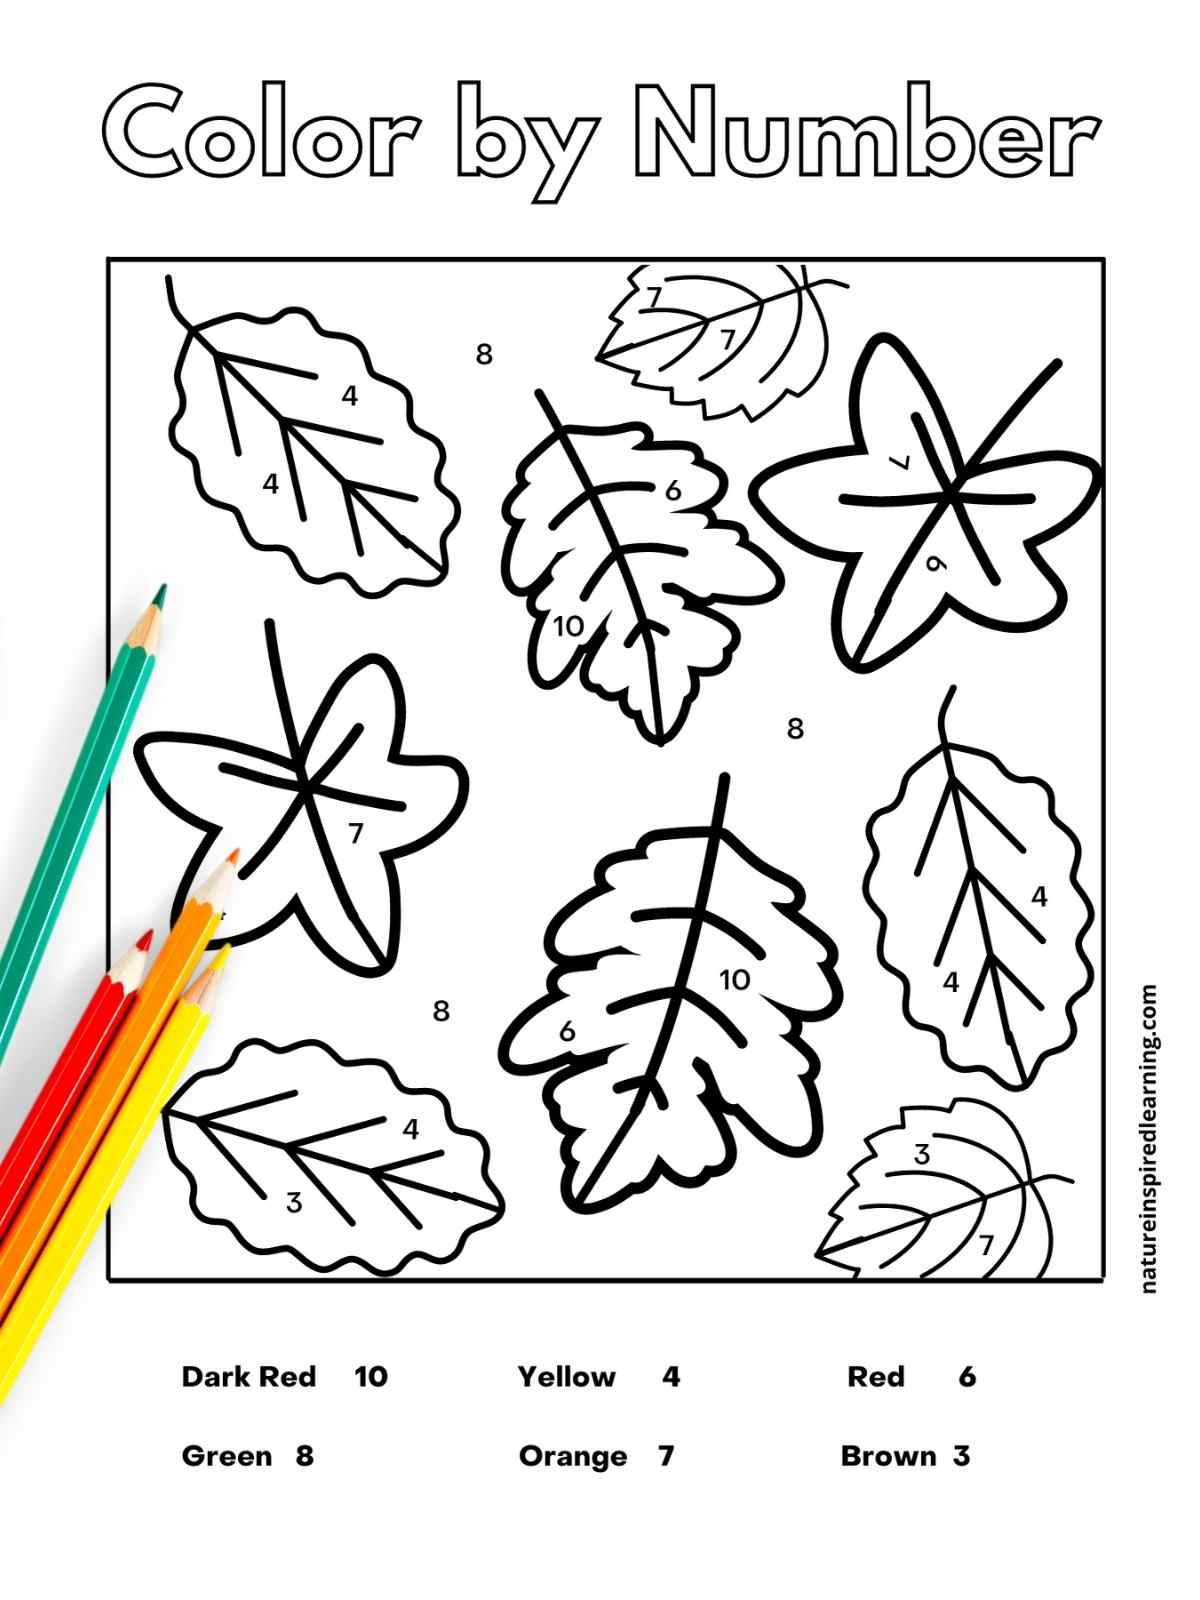 Black and white worksheet with color by number across the top in outline form with different types of leaves with numbers on them with a color key at bottom. Green, red, orange, and yellow colored pencils on top of printable left side.